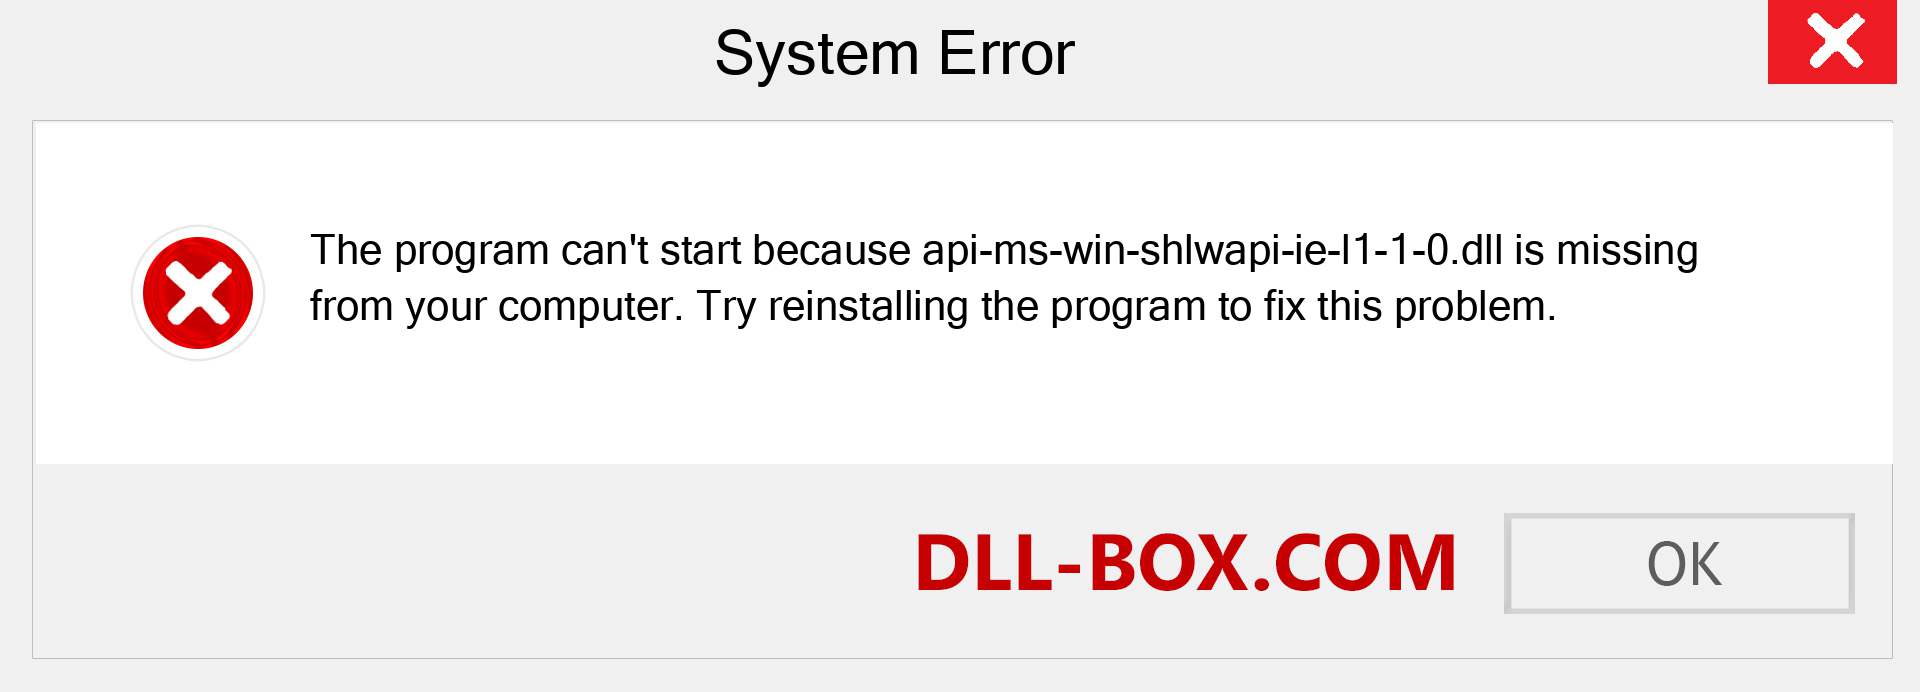  api-ms-win-shlwapi-ie-l1-1-0.dll file is missing?. Download for Windows 7, 8, 10 - Fix  api-ms-win-shlwapi-ie-l1-1-0 dll Missing Error on Windows, photos, images